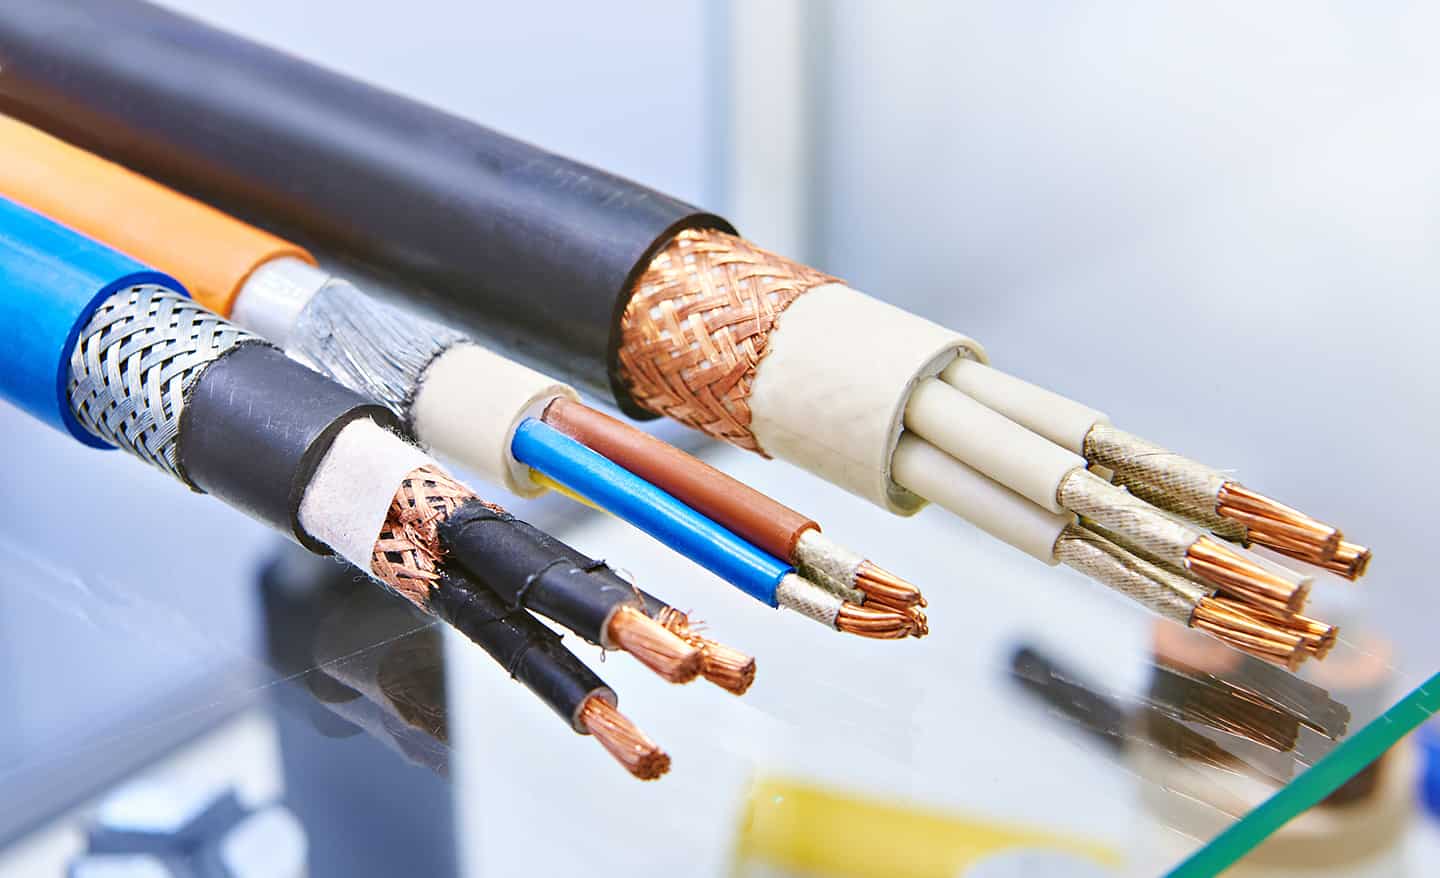 What Is 3 Wire Cable Used For